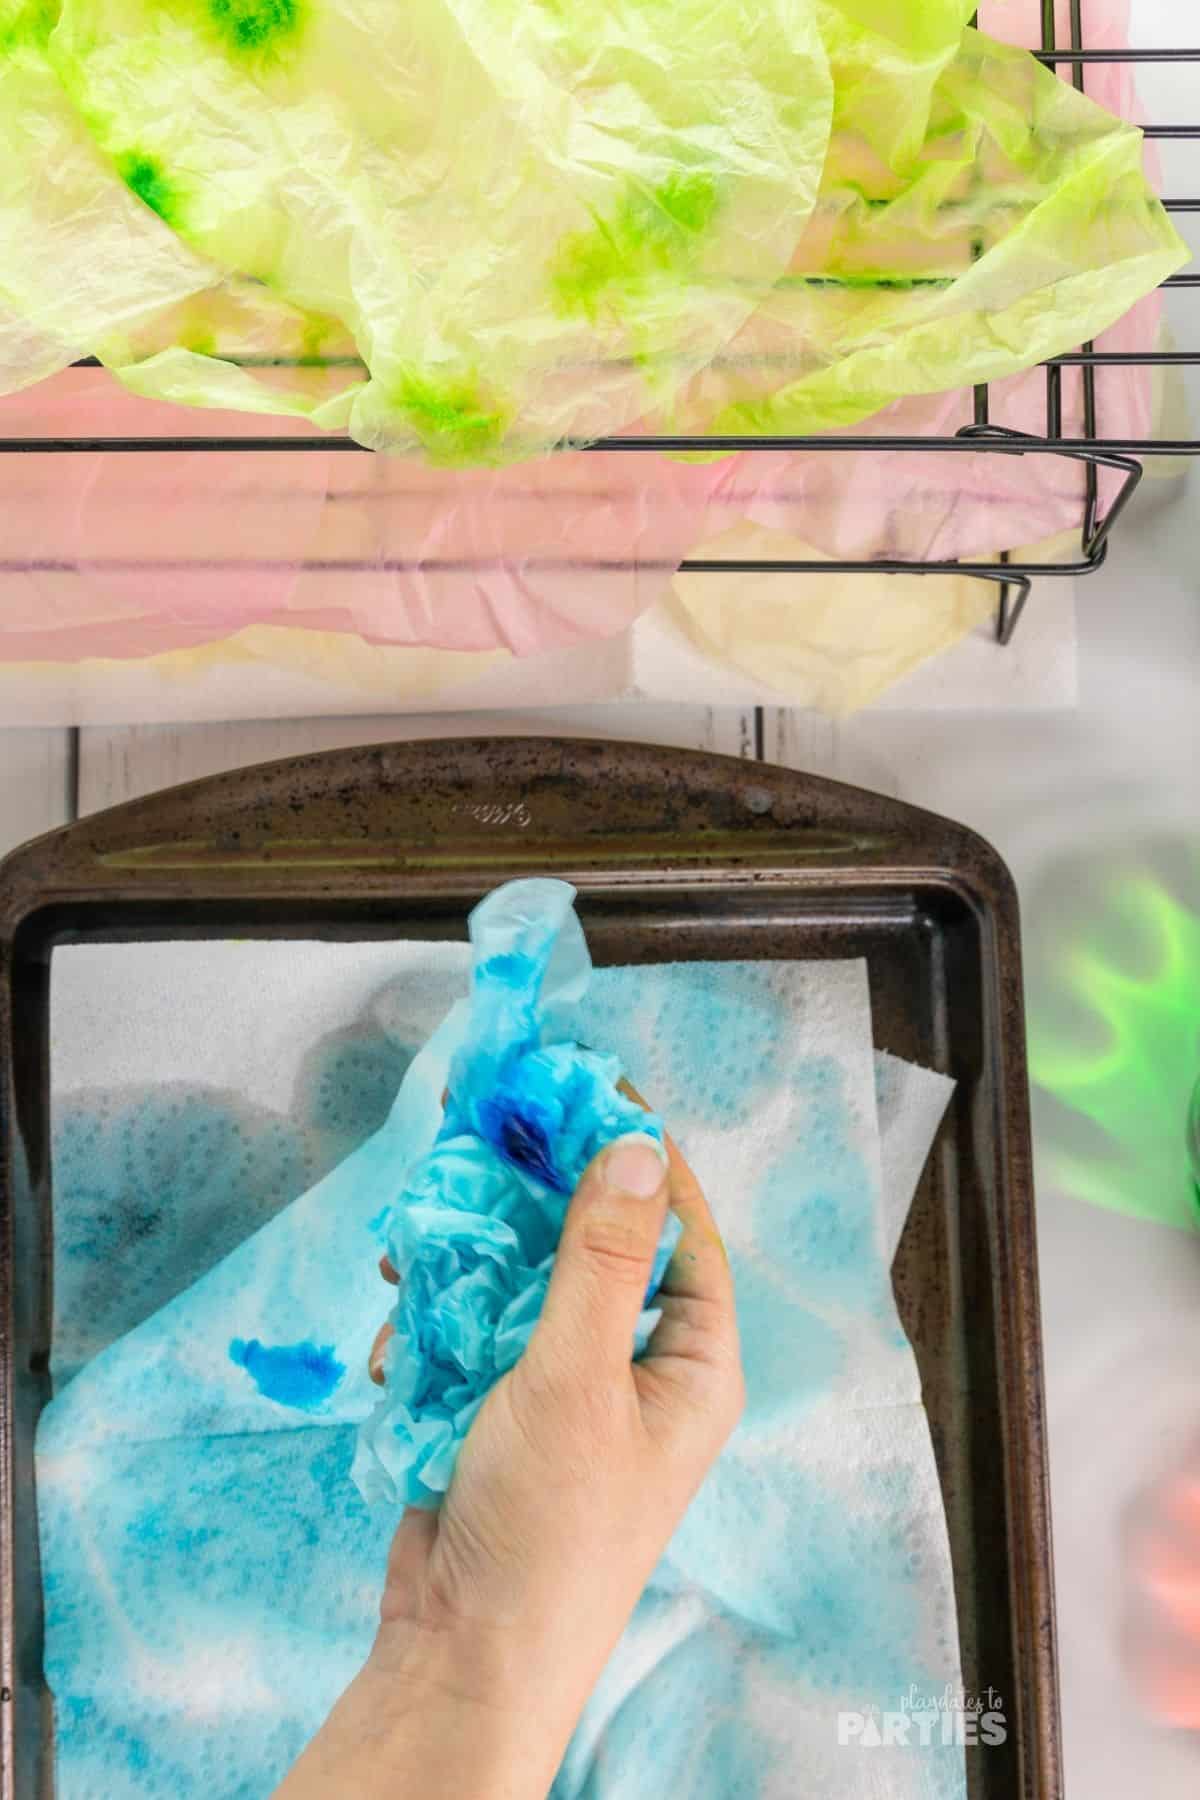 A woman's hand squeezing out excess water from a coffee filter with blue food coloring.